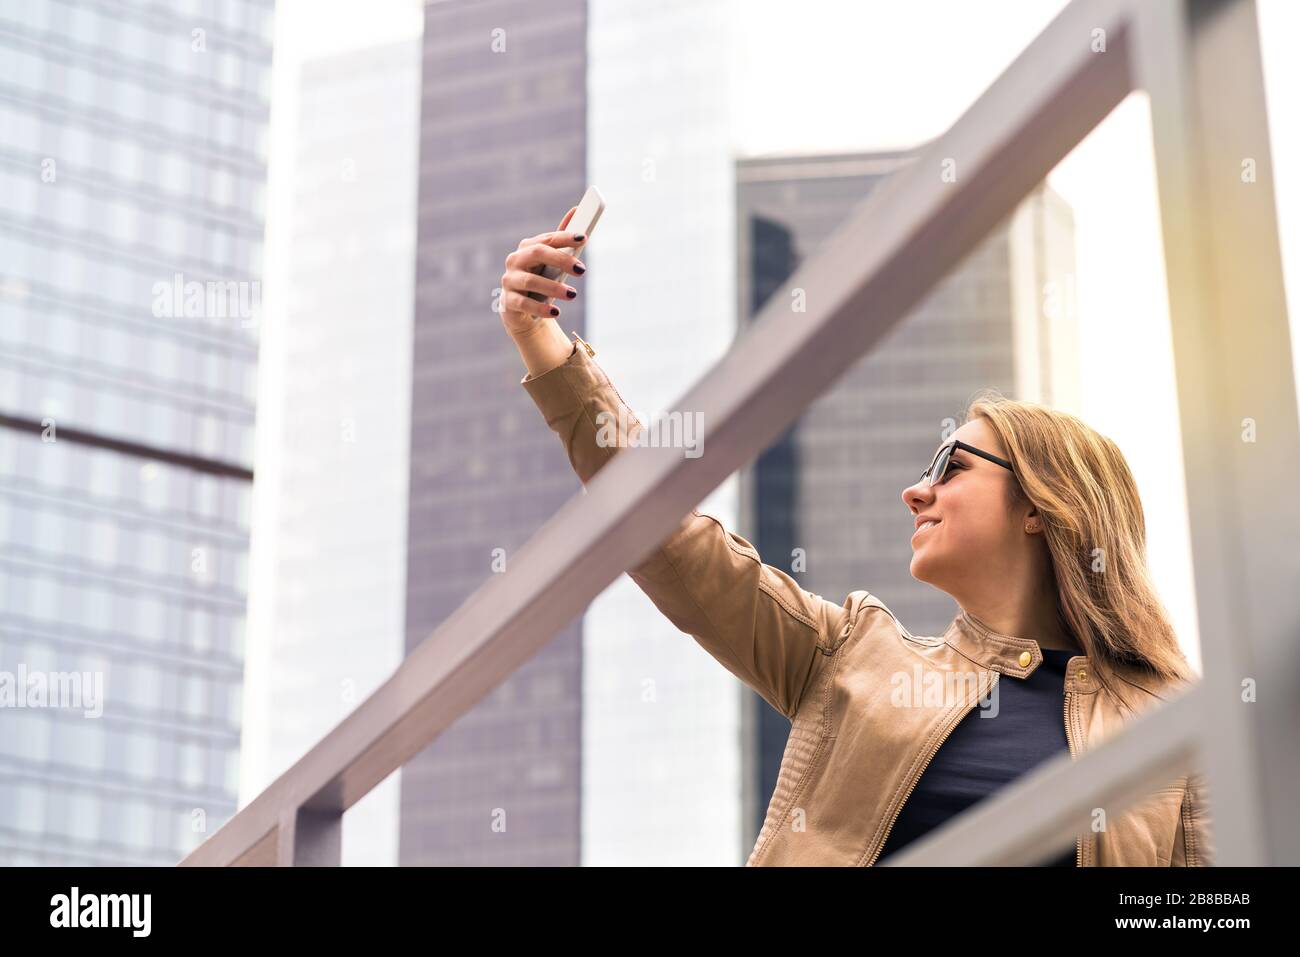 Young happy woman taking selfie in city street. Smiling lady taking photo of herself with smartphone camera. Mobile phone photography. Stock Photo